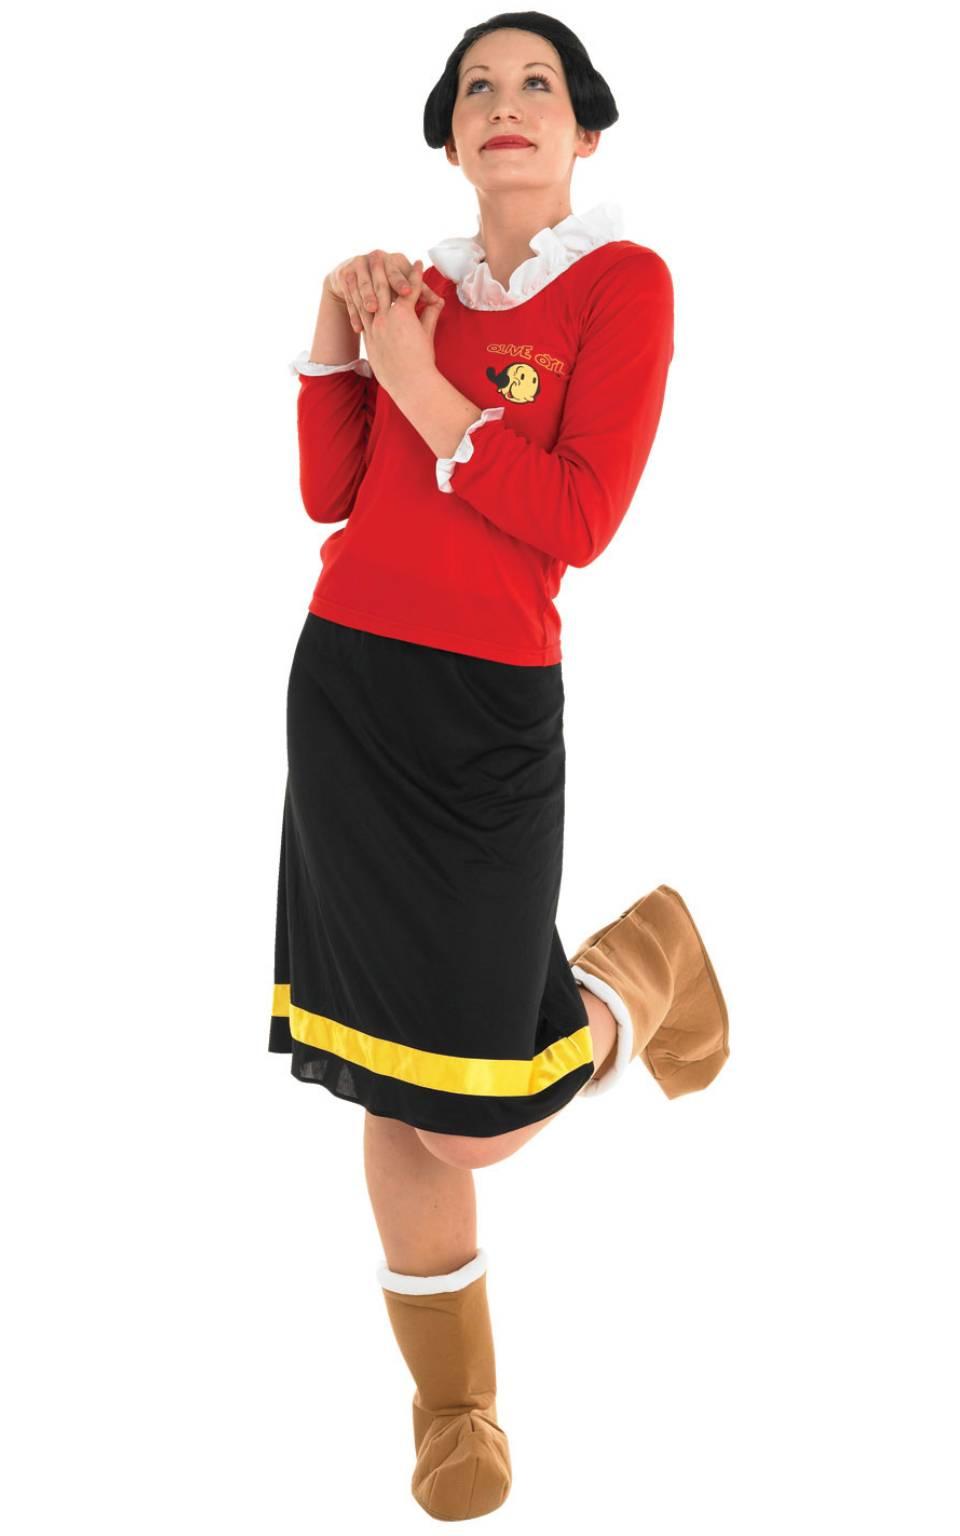 Lady's Olive Oyl costume by Rubies 889041 available here at Karnival Costumes online party shop